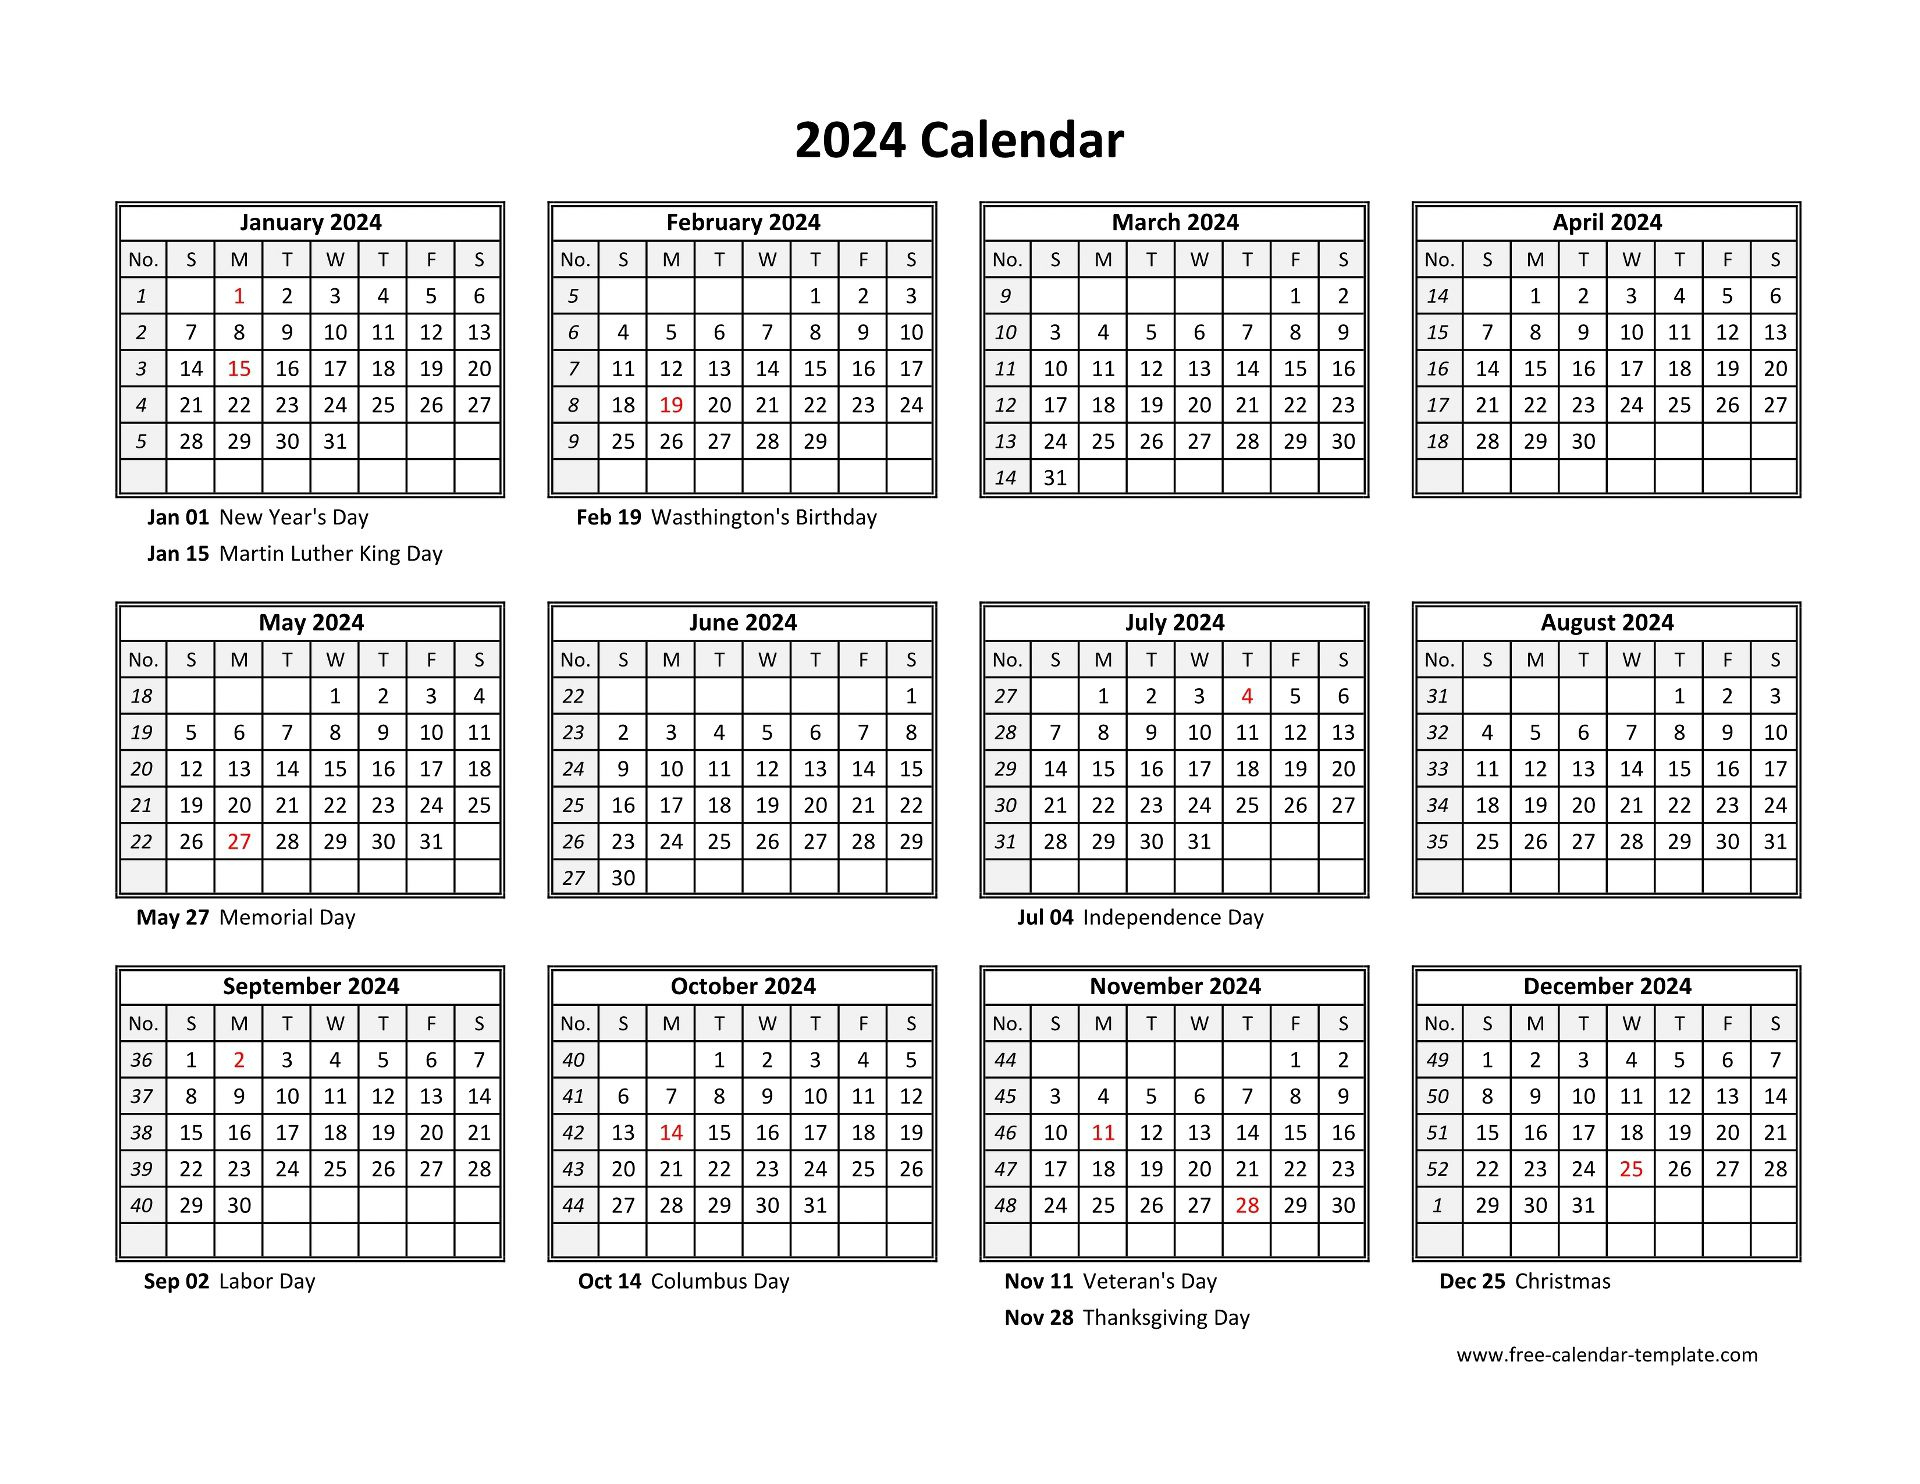 Yearly Calendar 2024 Printable With Federal Holidays | Free | 2024 Calendar Printable With Holidays